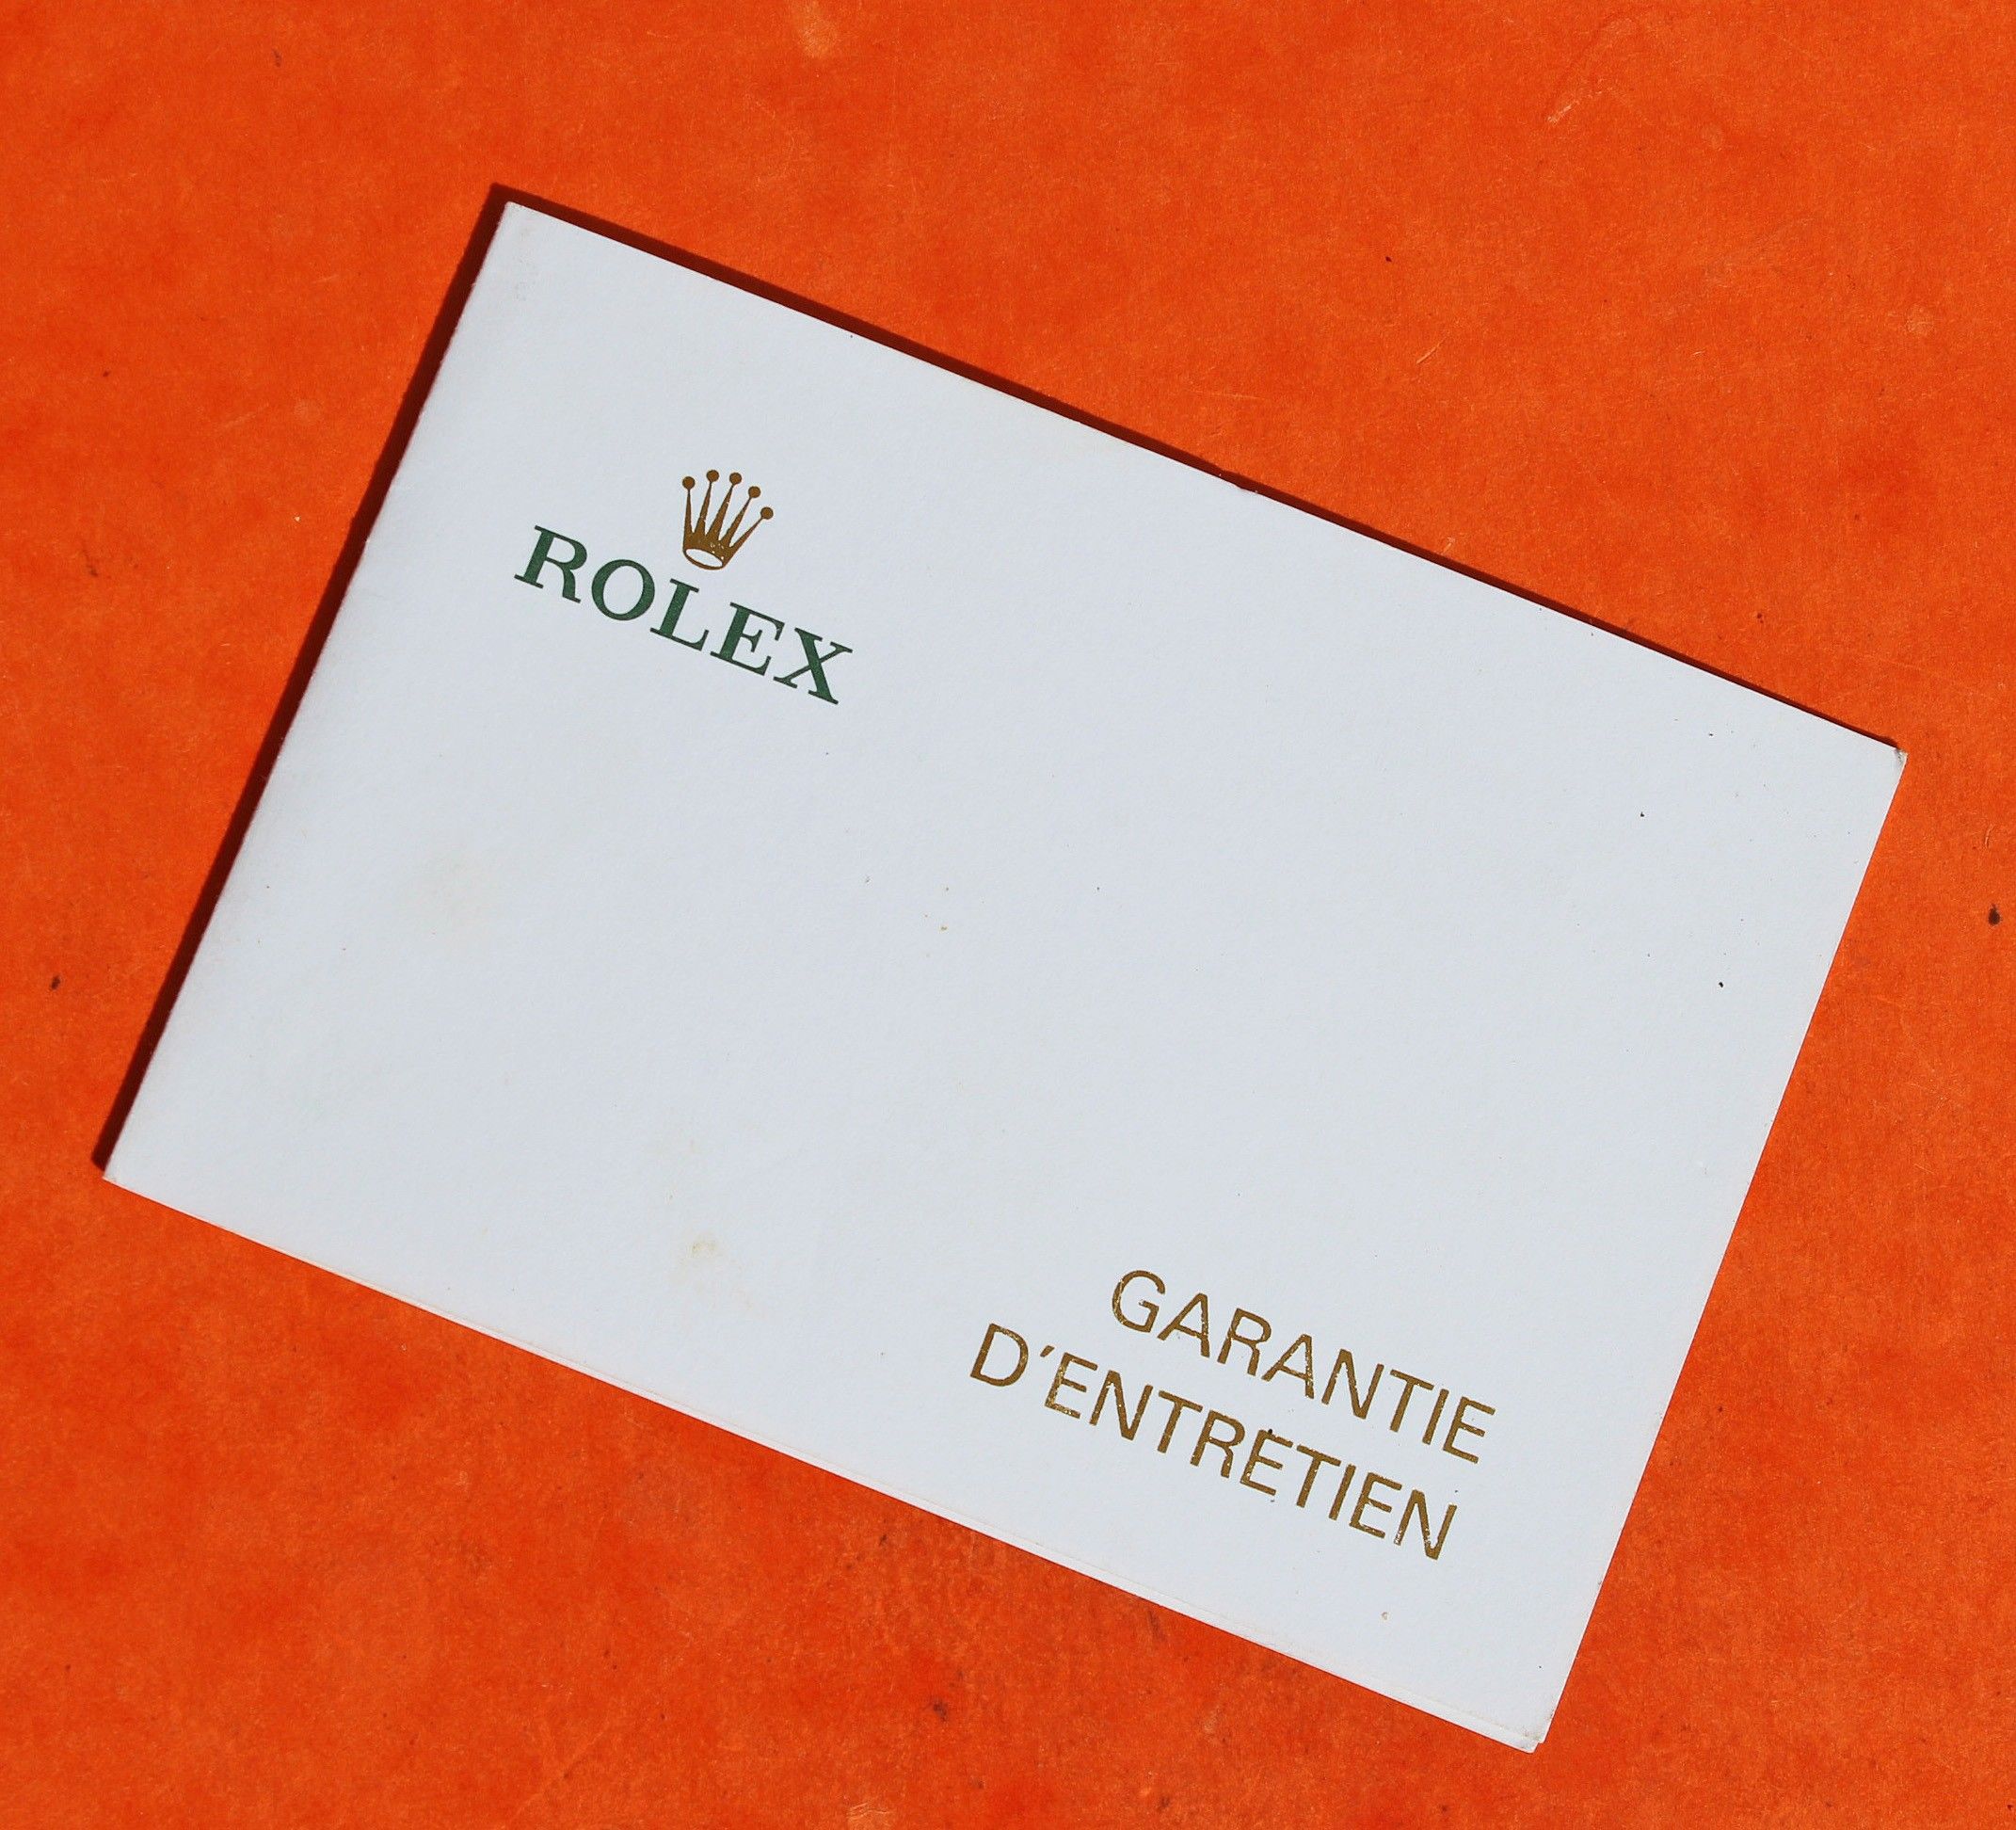 ROLEX, TUDOR RARE VINTAGE 90's FRENCH SIGNED AD BLANK SERVICE PAPER WARRANTY PAPER ROLEX WATCHES